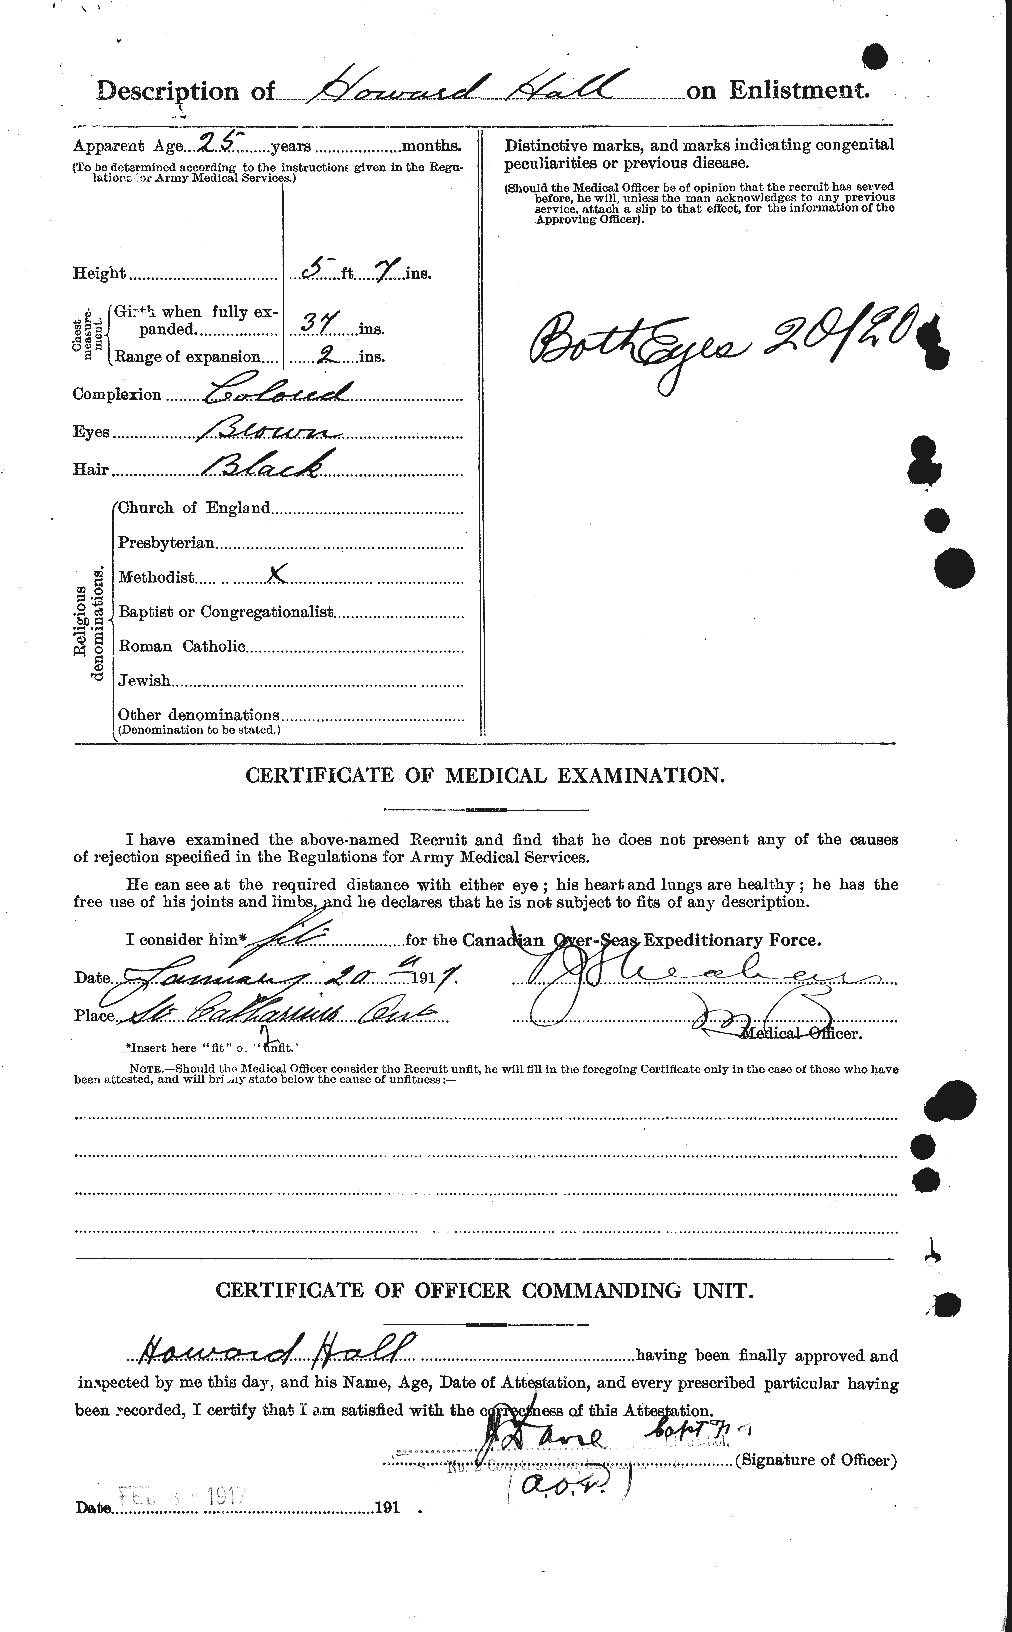 Personnel Records of the First World War - CEF 374154b